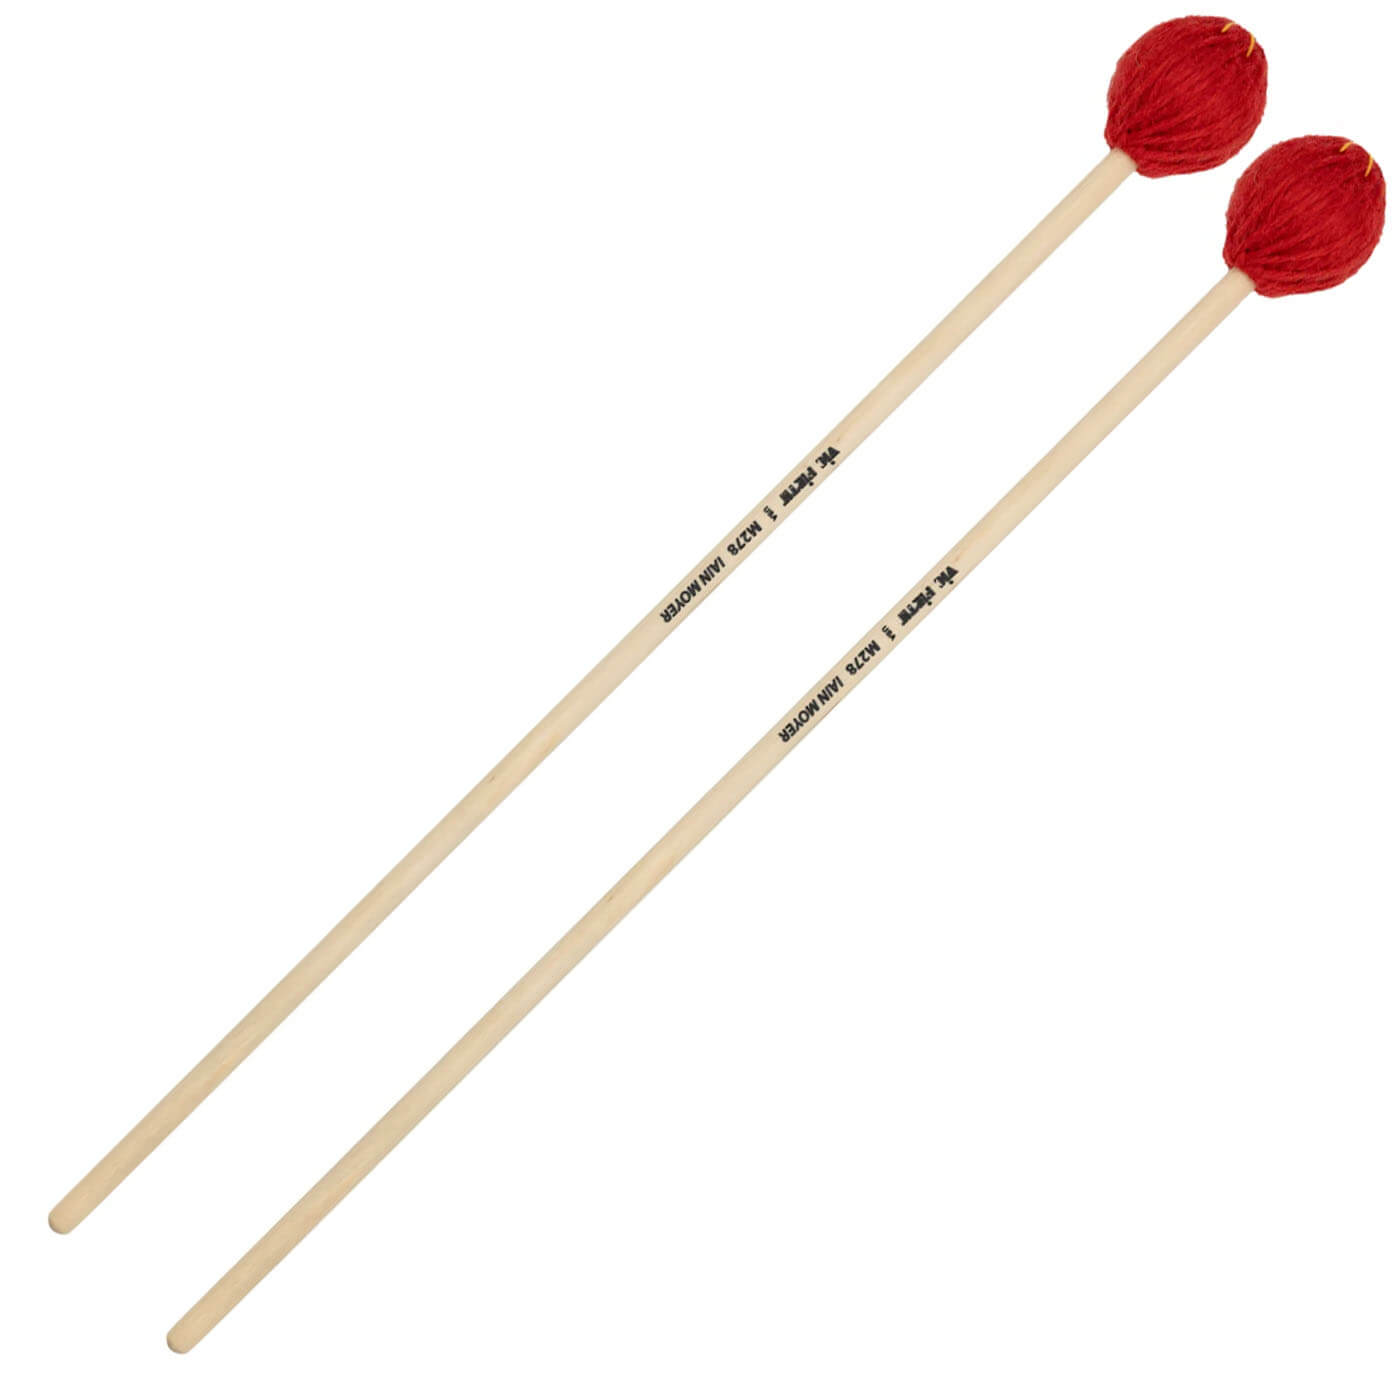 Vic Firth Corpsmaster Iain Moyer Extremely Hard Keyboard Mallets